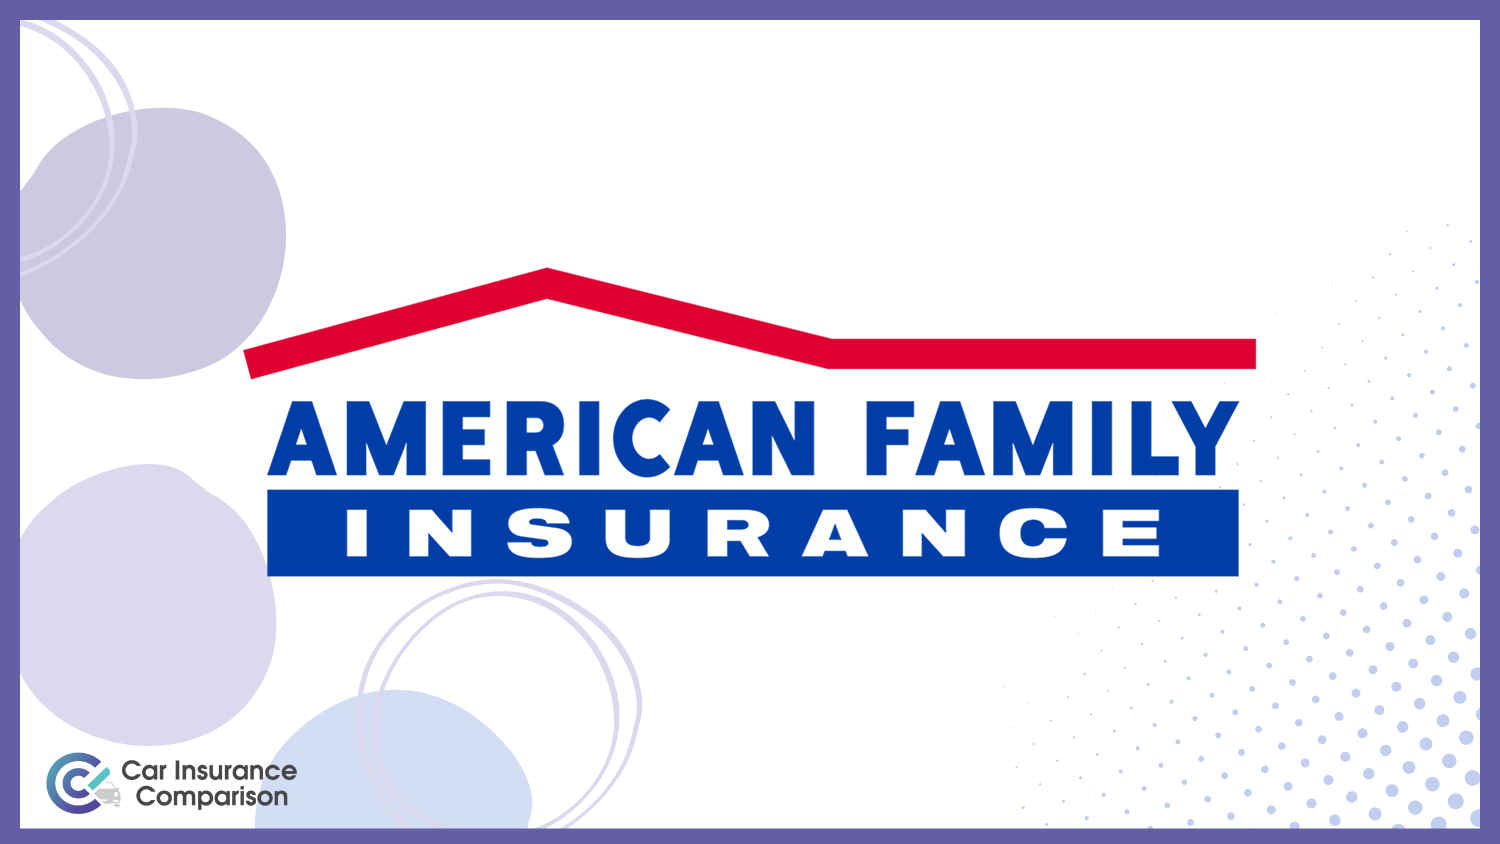 American Family: Compare Best Car Insurance Companies That Only Look Back Three Years